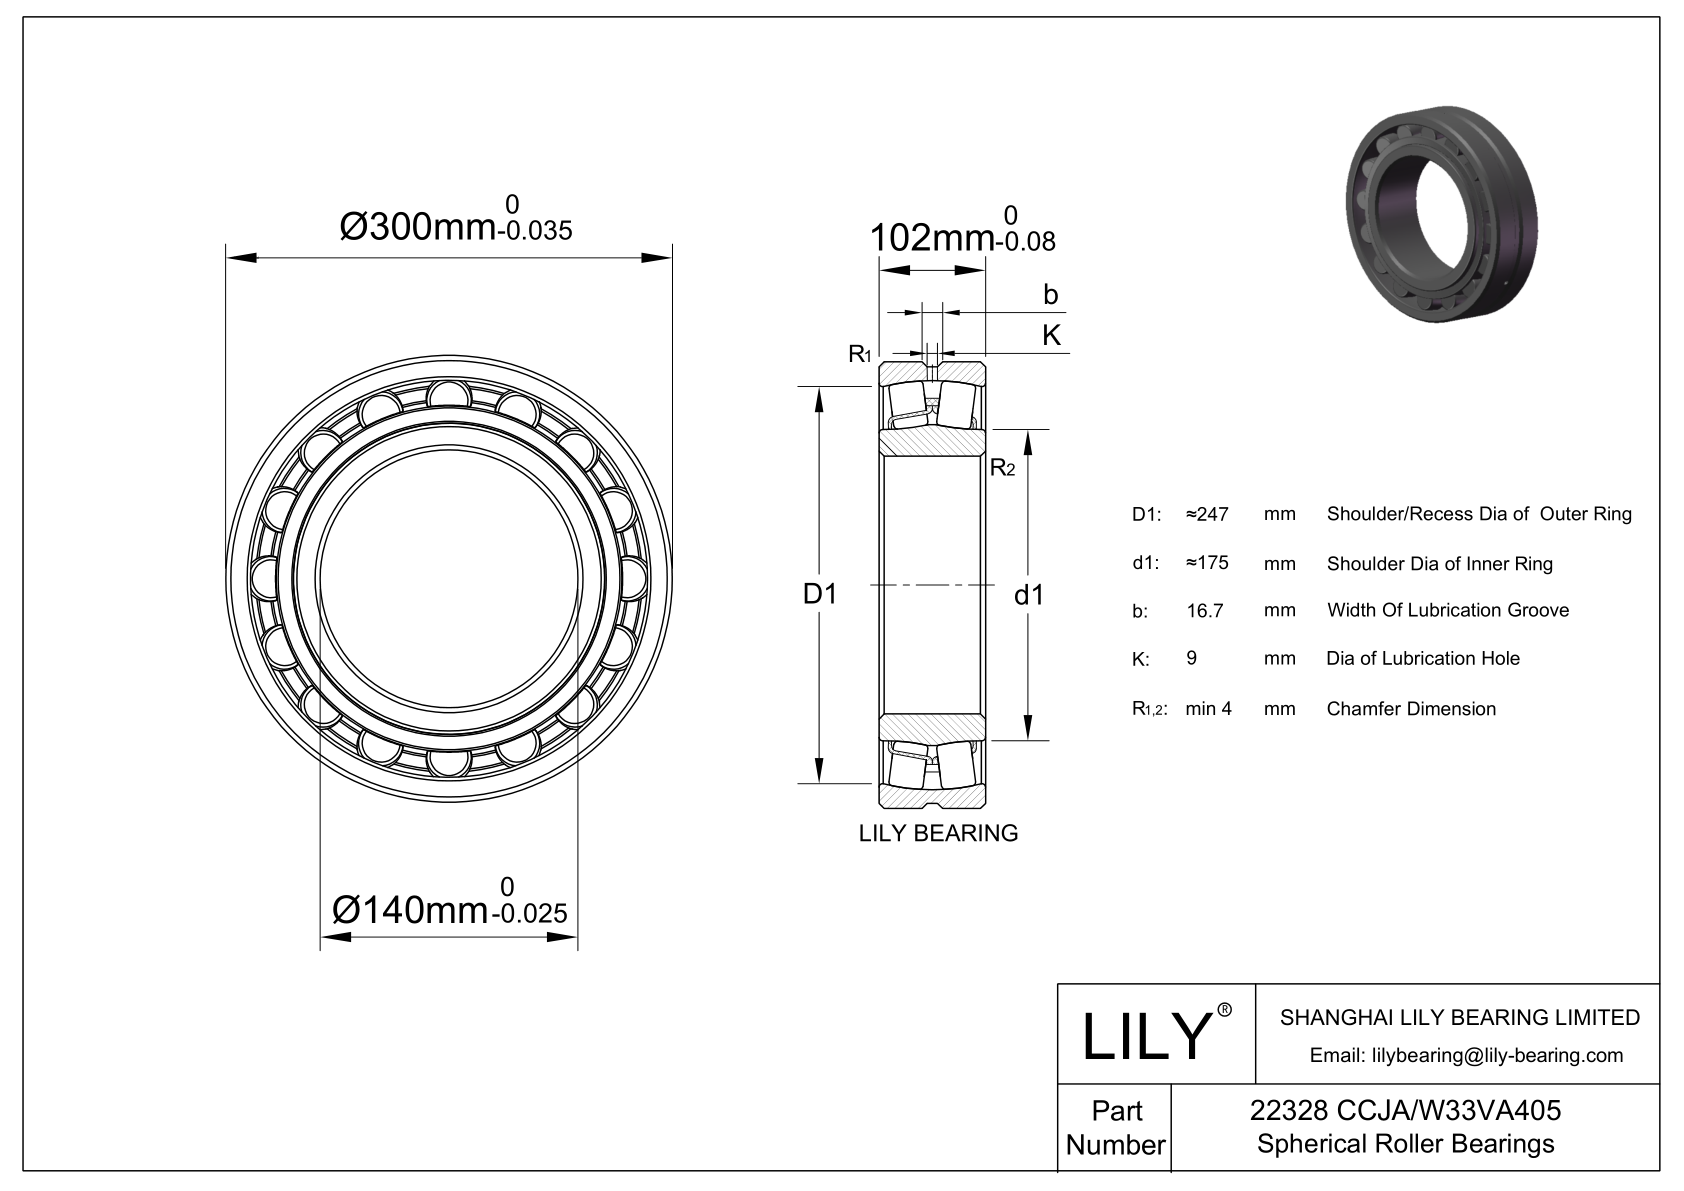 22328 CCJA/W33VA405 Double Row Spherical Roller Bearing cad drawing